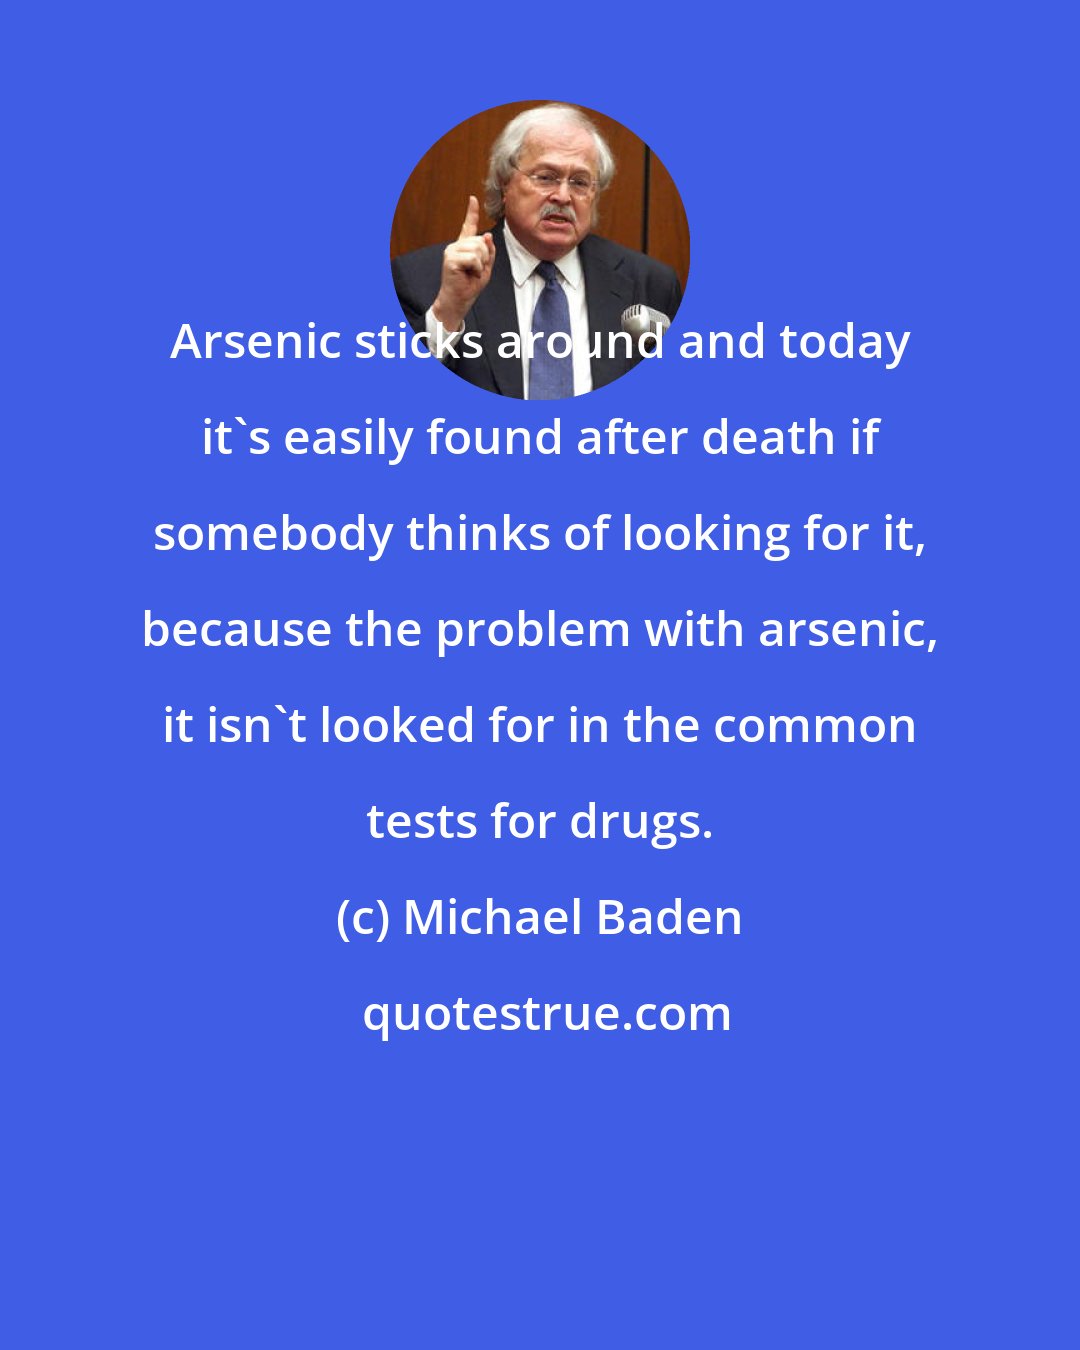 Michael Baden: Arsenic sticks around and today it's easily found after death if somebody thinks of looking for it, because the problem with arsenic, it isn't looked for in the common tests for drugs.